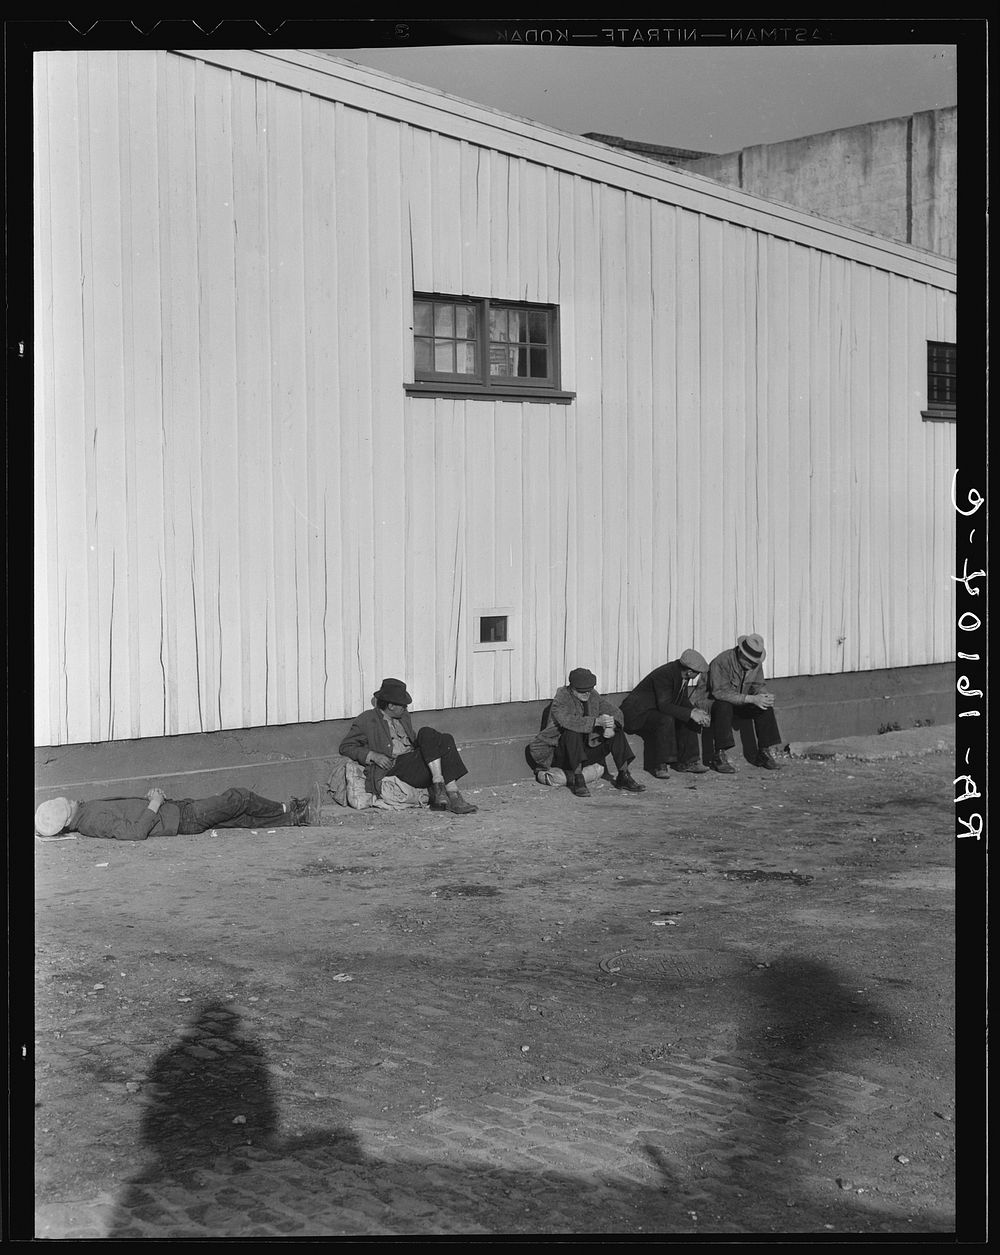 On the sun side of the shed. Transient men, San Francisco, California. Sourced from the Library of Congress.